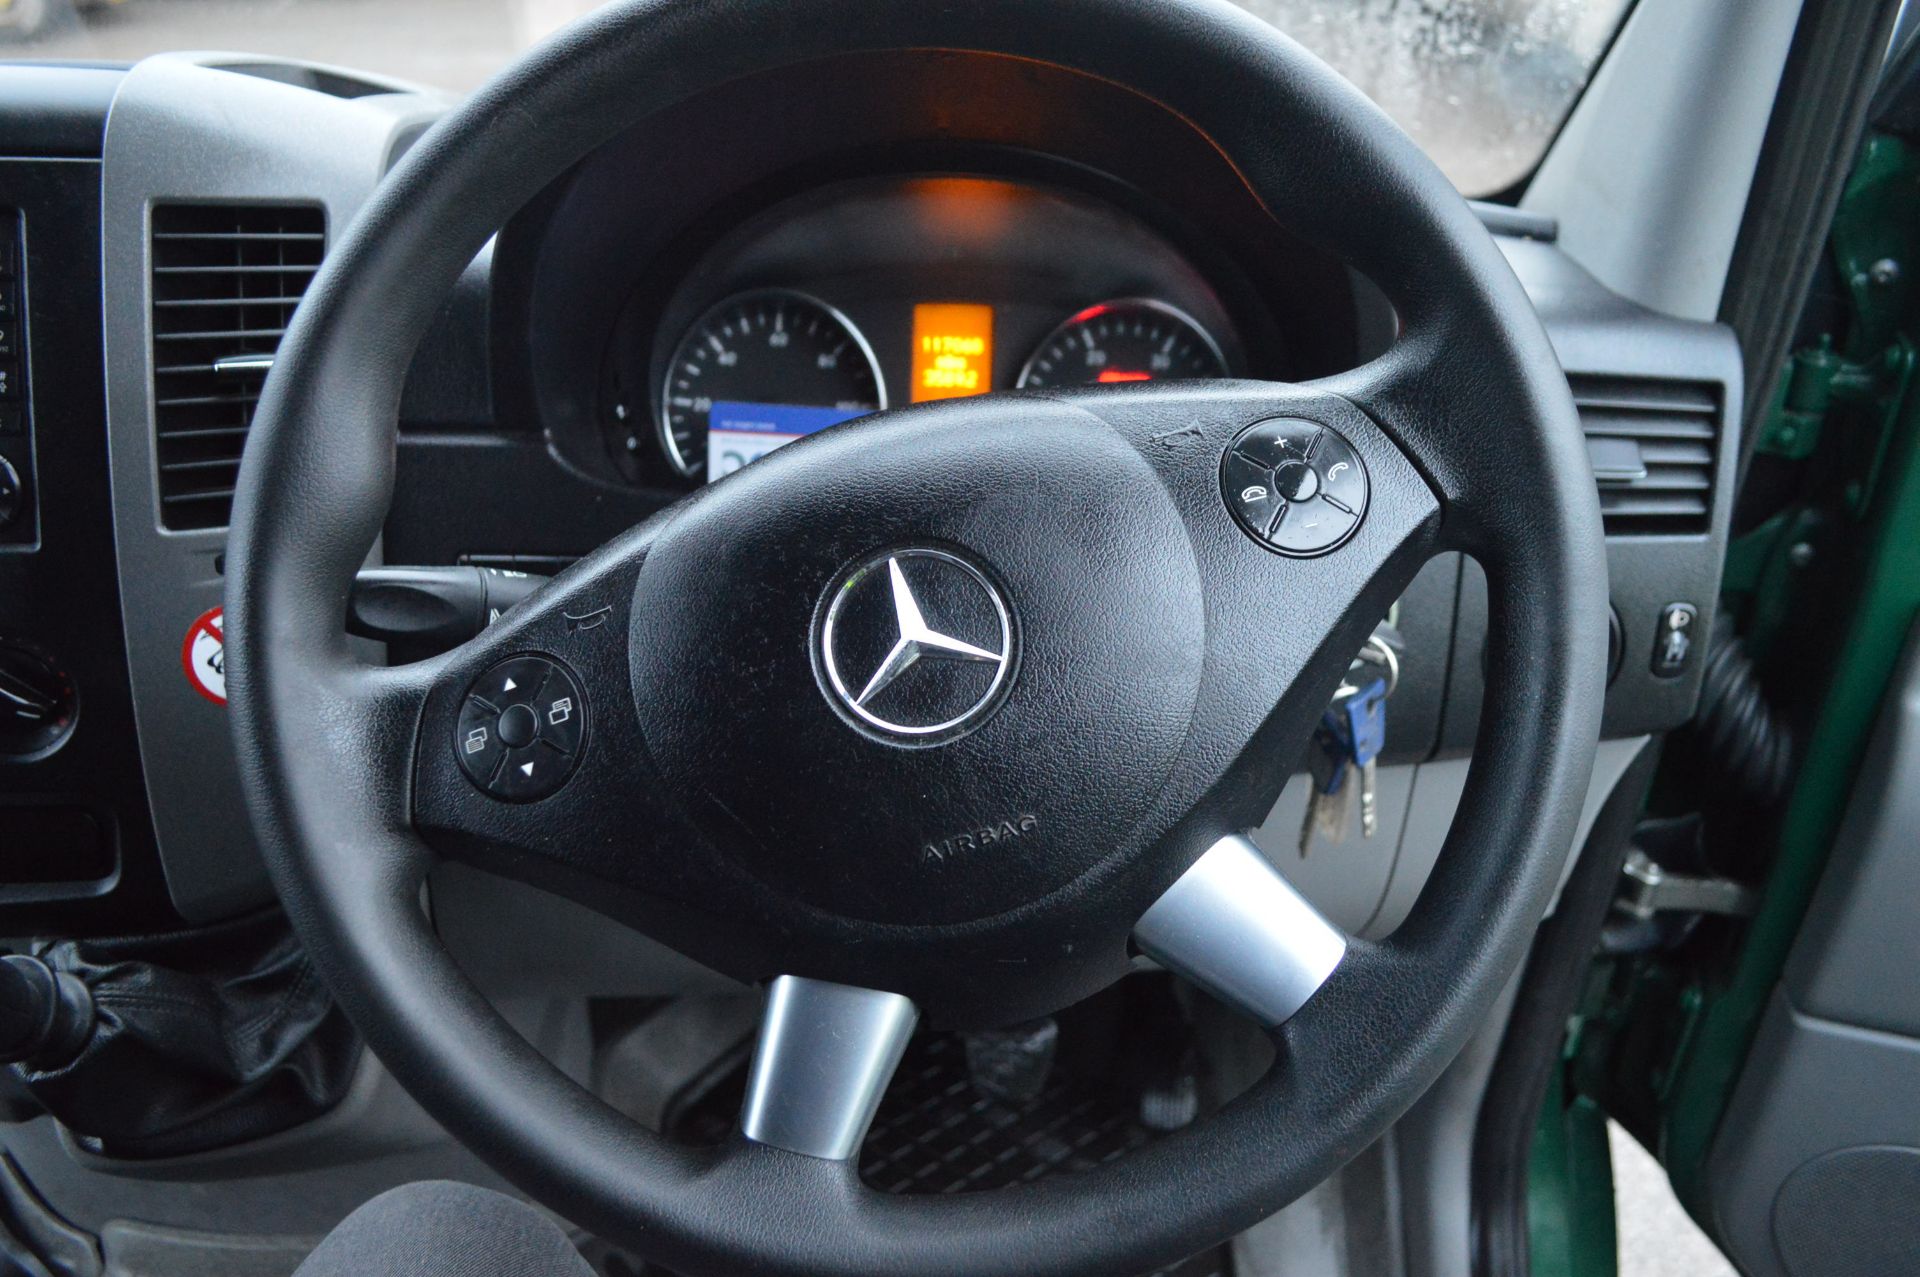 2014/64 REG MERCEDES-BENZ SPRINTER 313 CDI, 1 OWNER FROM NEW *NO VAT* - Image 19 of 21